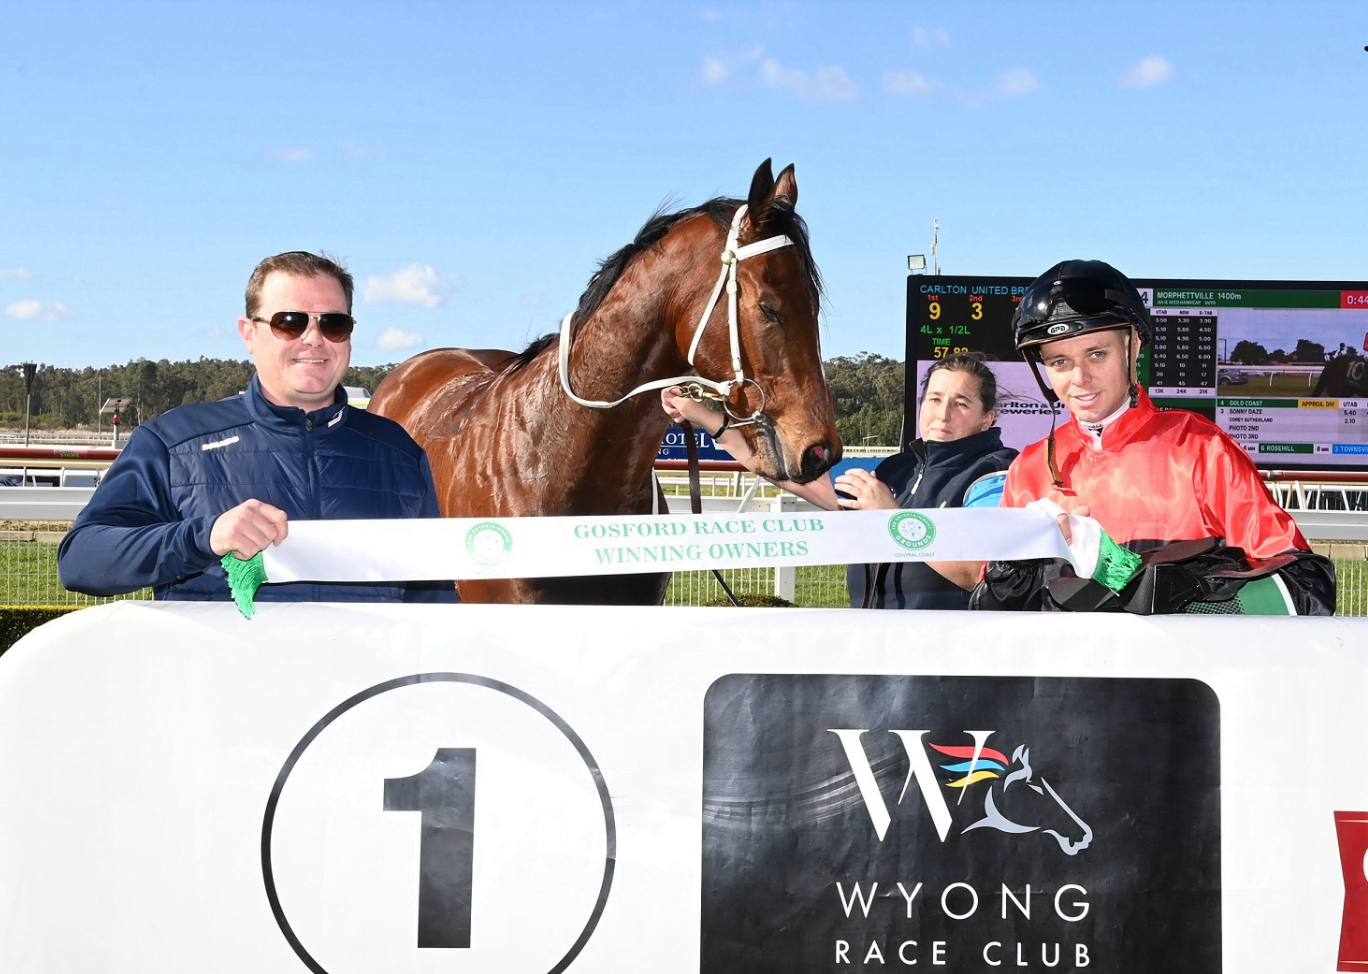 RYAN NAME UP IN LIGHTS AT WYONG  3